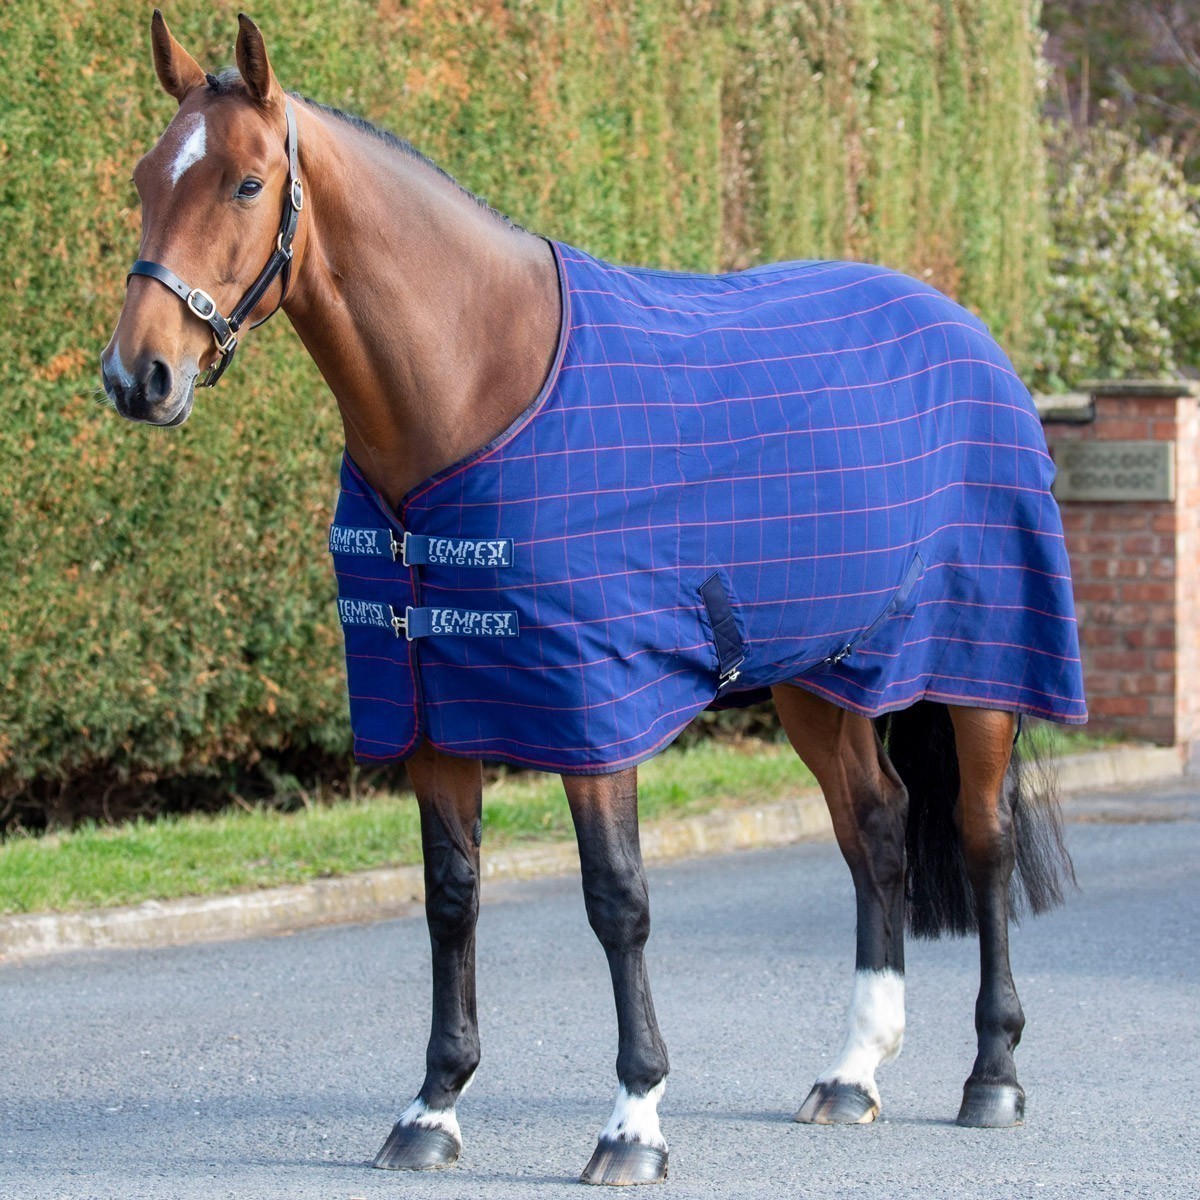 Shires Tempest Original Le Sheet Lightweight Turnout Rugs Orchard Equestrian Ltd